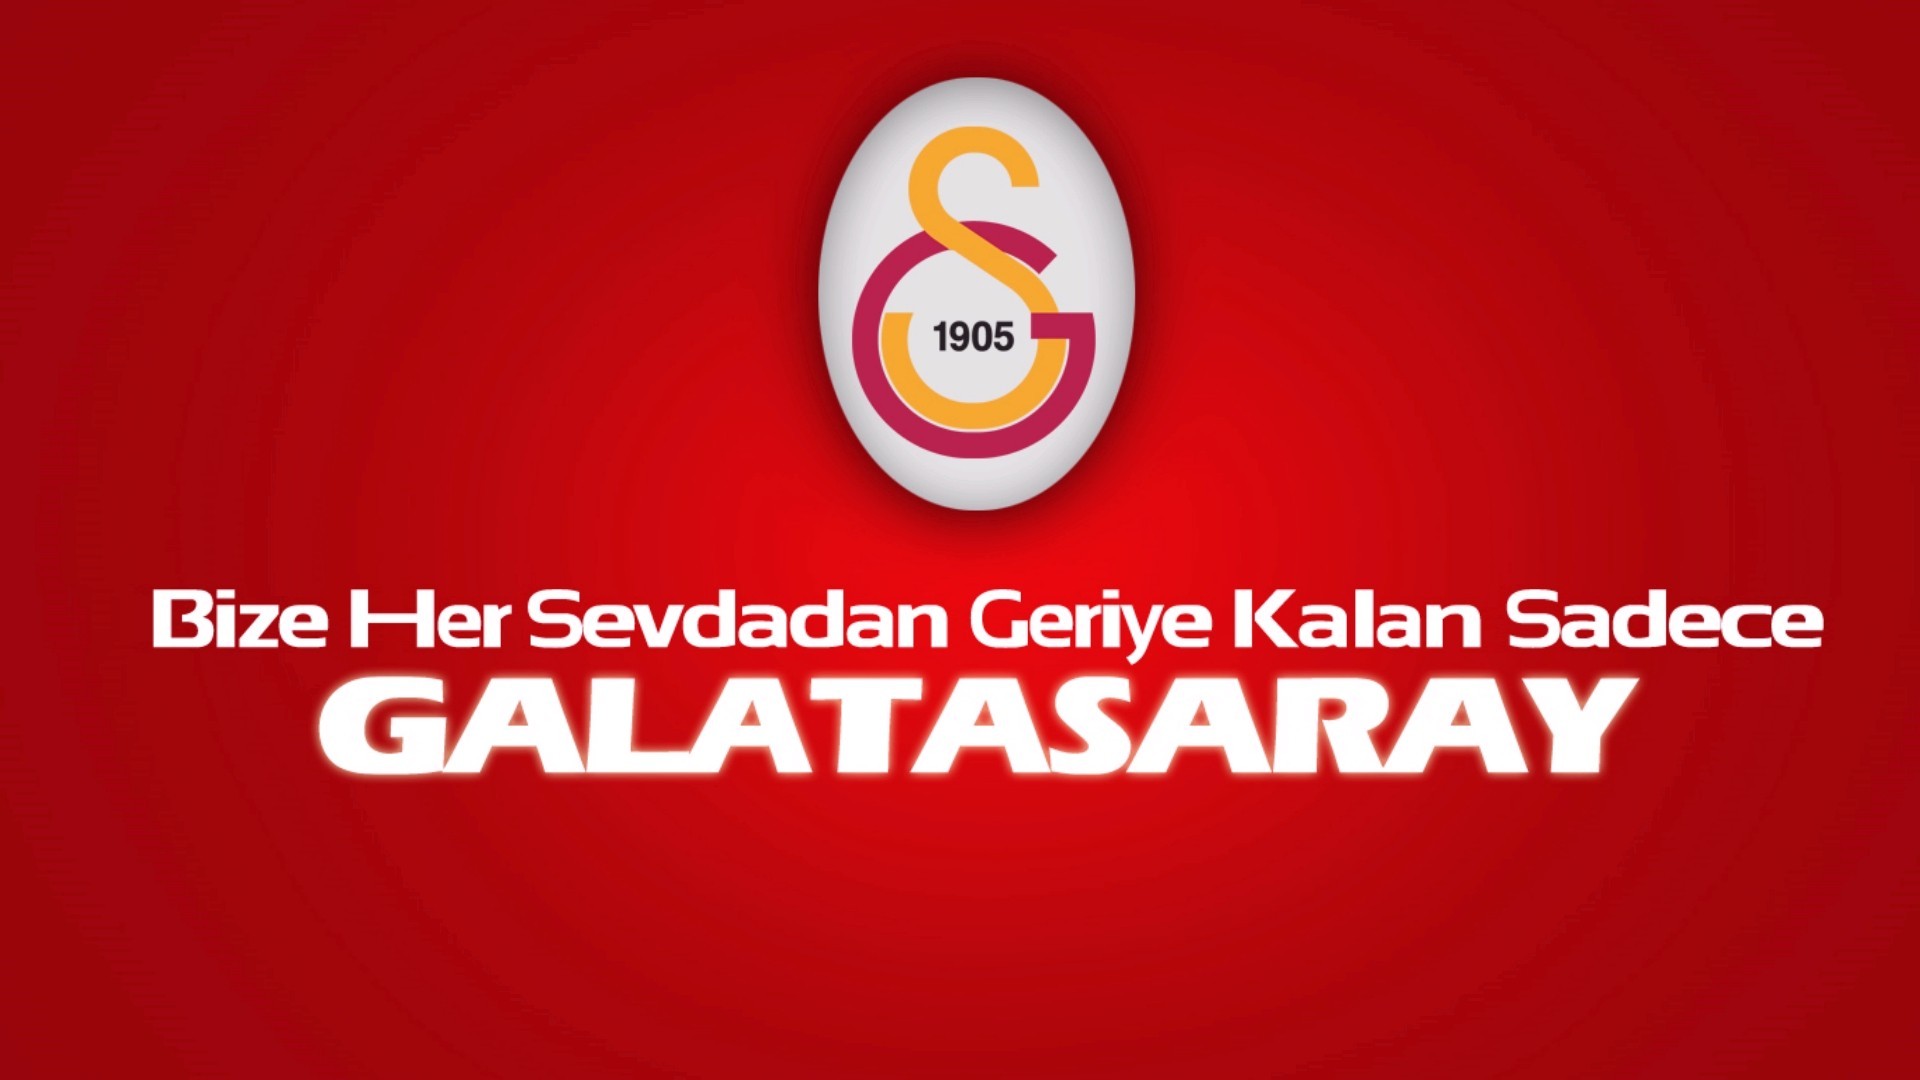 General 1920x1080 Galatasaray S.K. 1905 (Year) red background typography logo sport soccer clubs